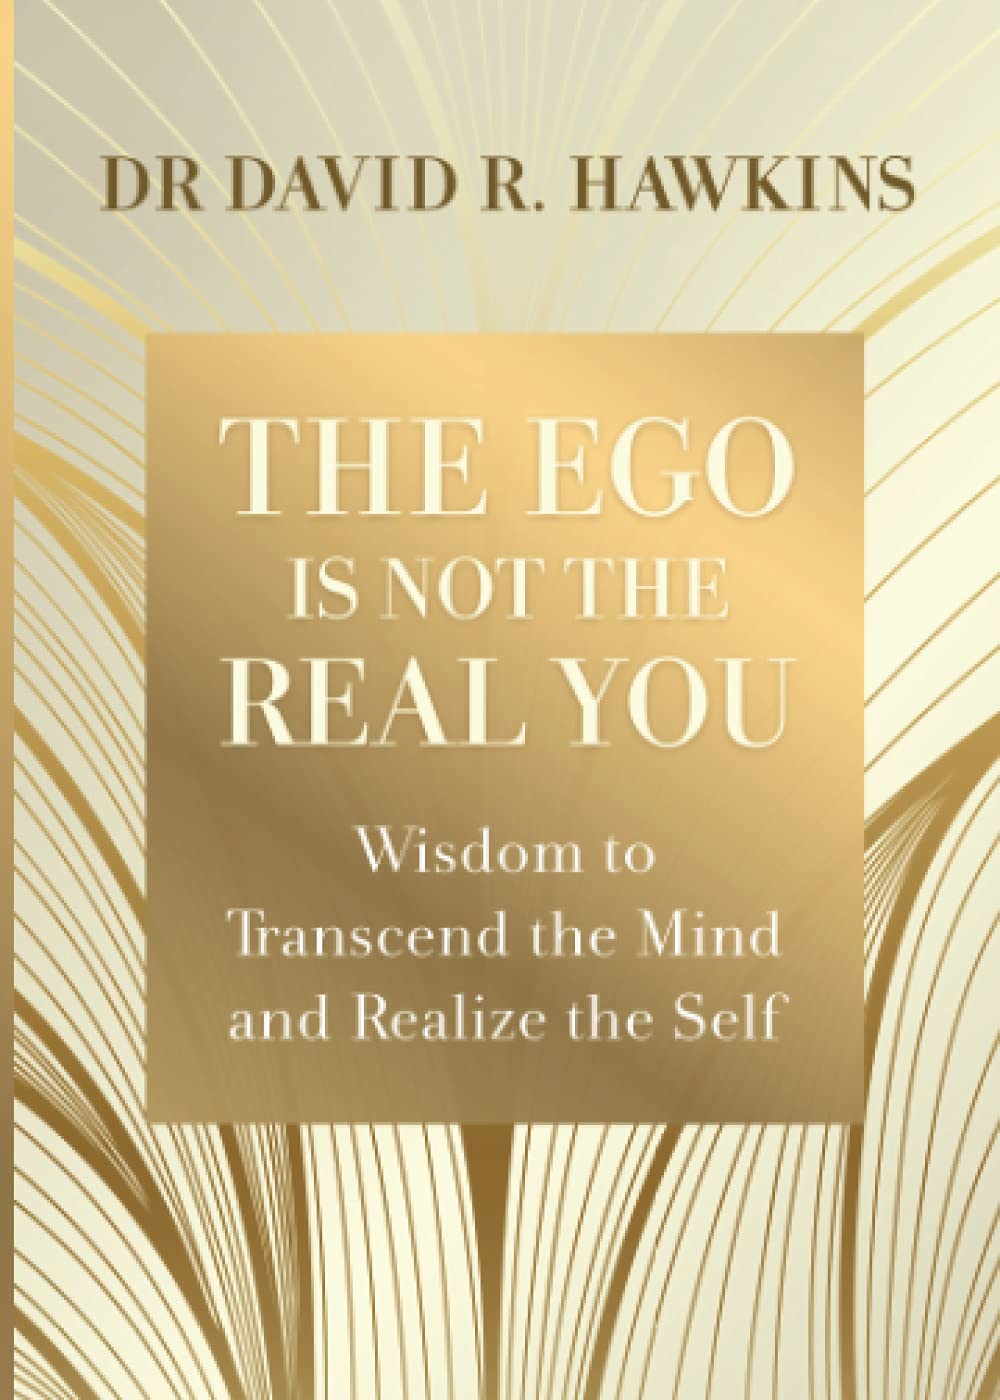 Book Ego Is Not the Real You David R. Hawkins